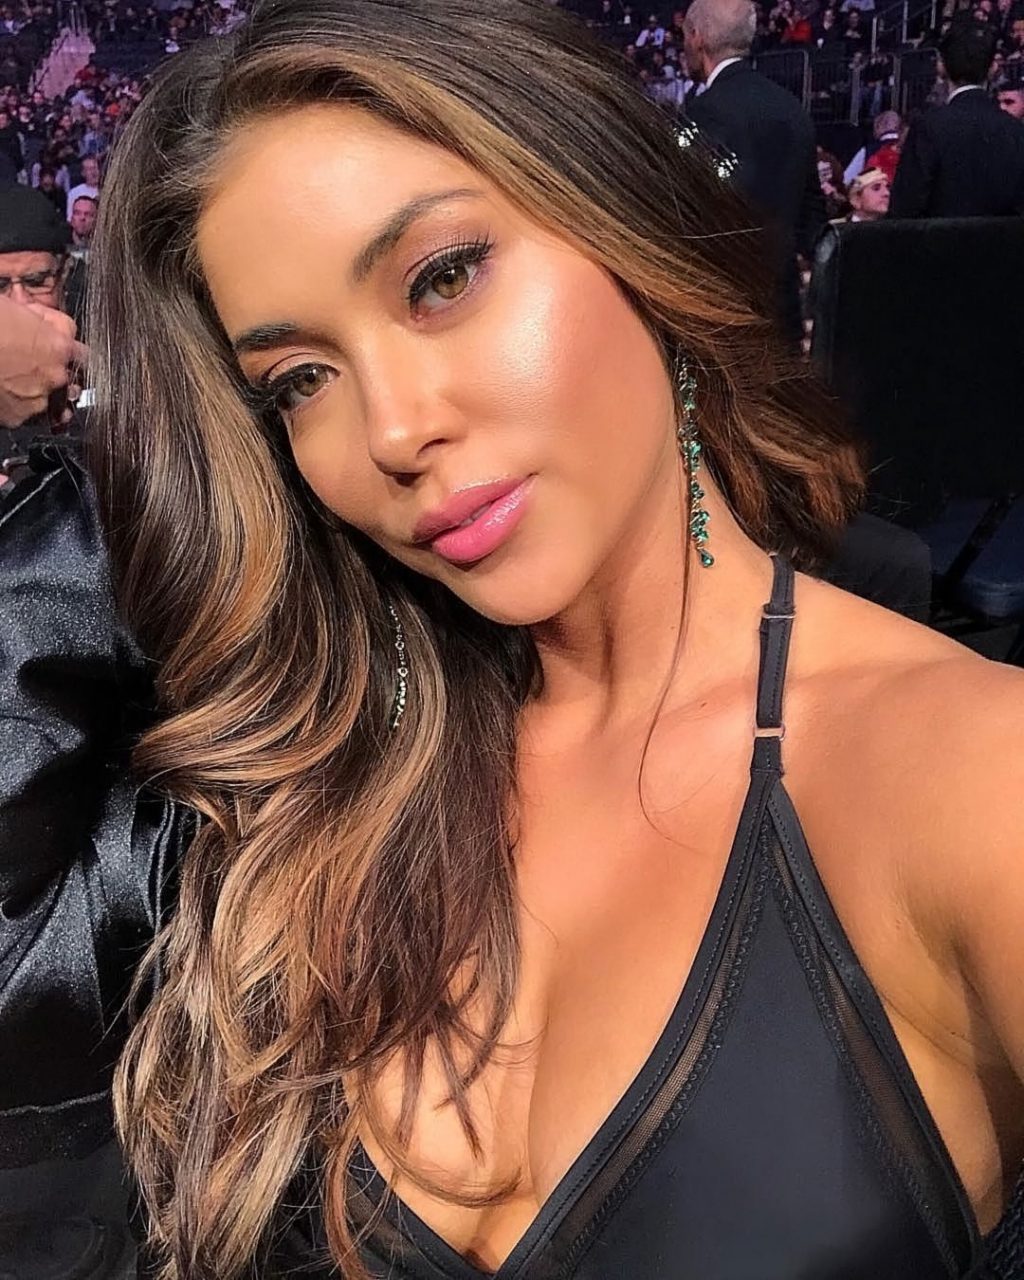 Arianny Celeste Nude Leaked &amp; Topless (221 Photos + Videos)